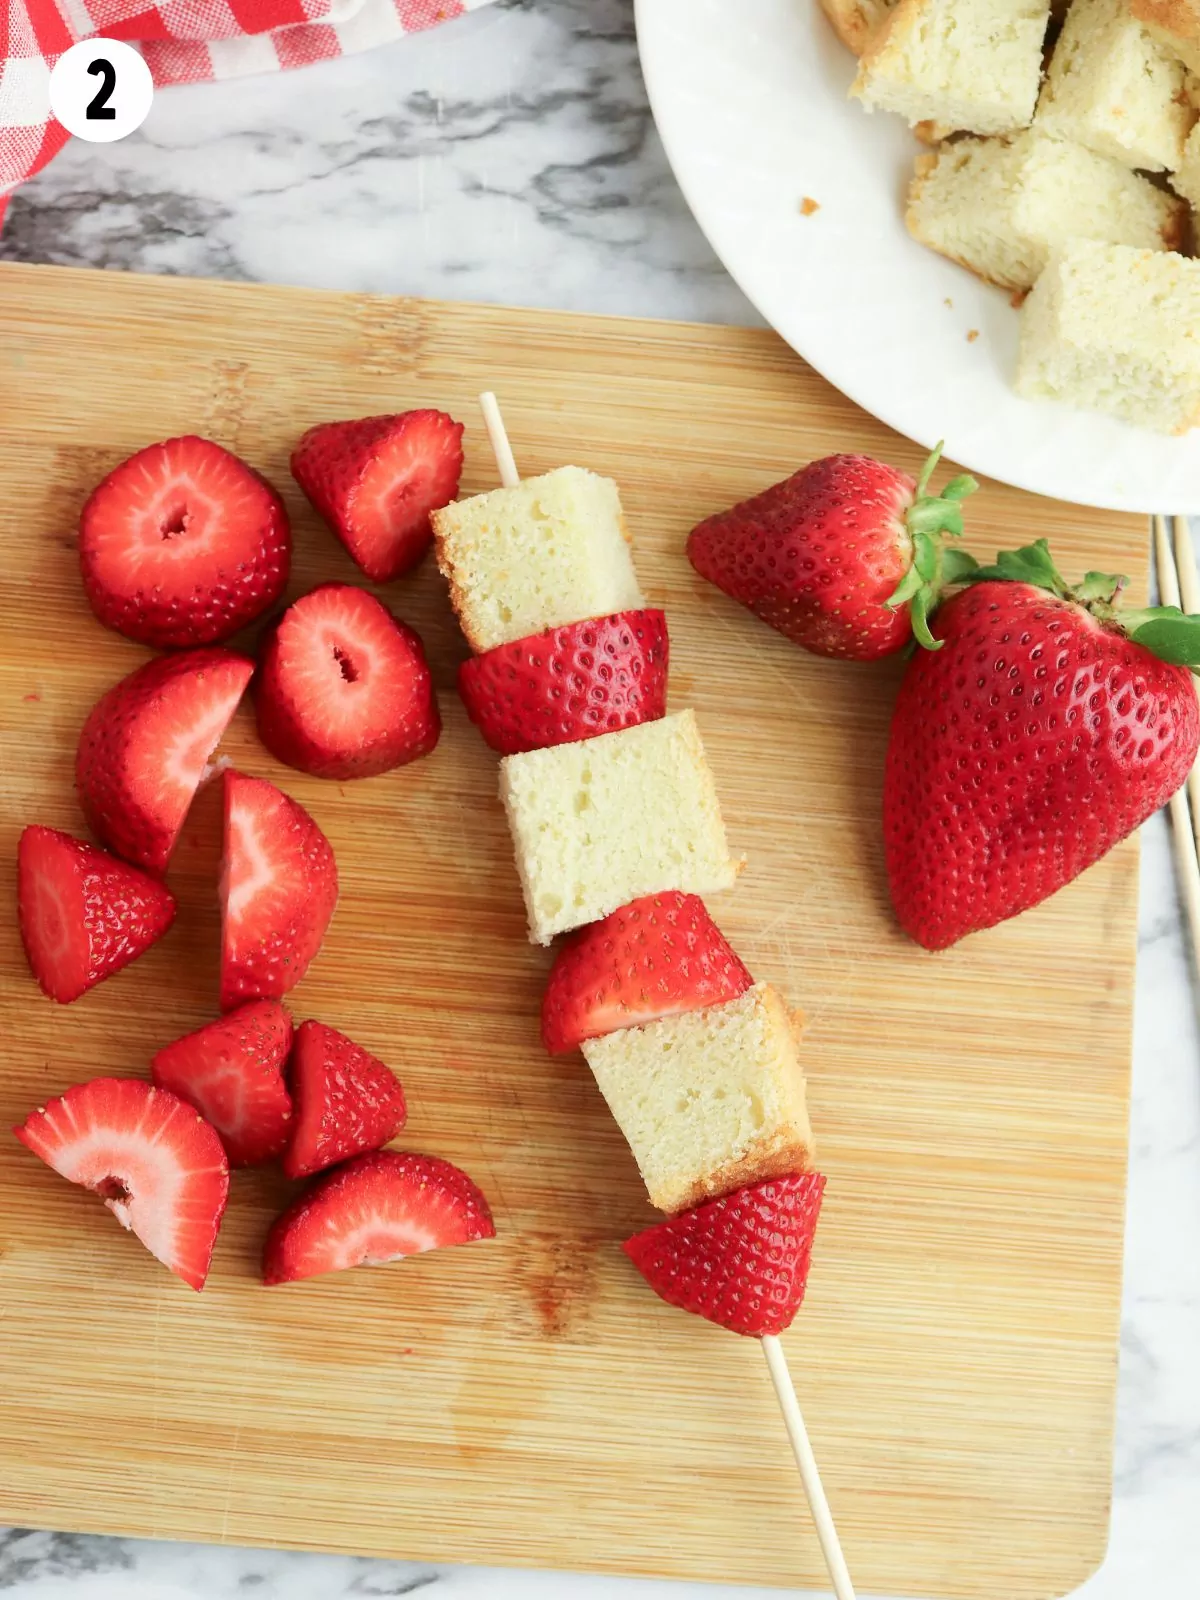 pound cake and strawberries threaded on a bamboo skewer.